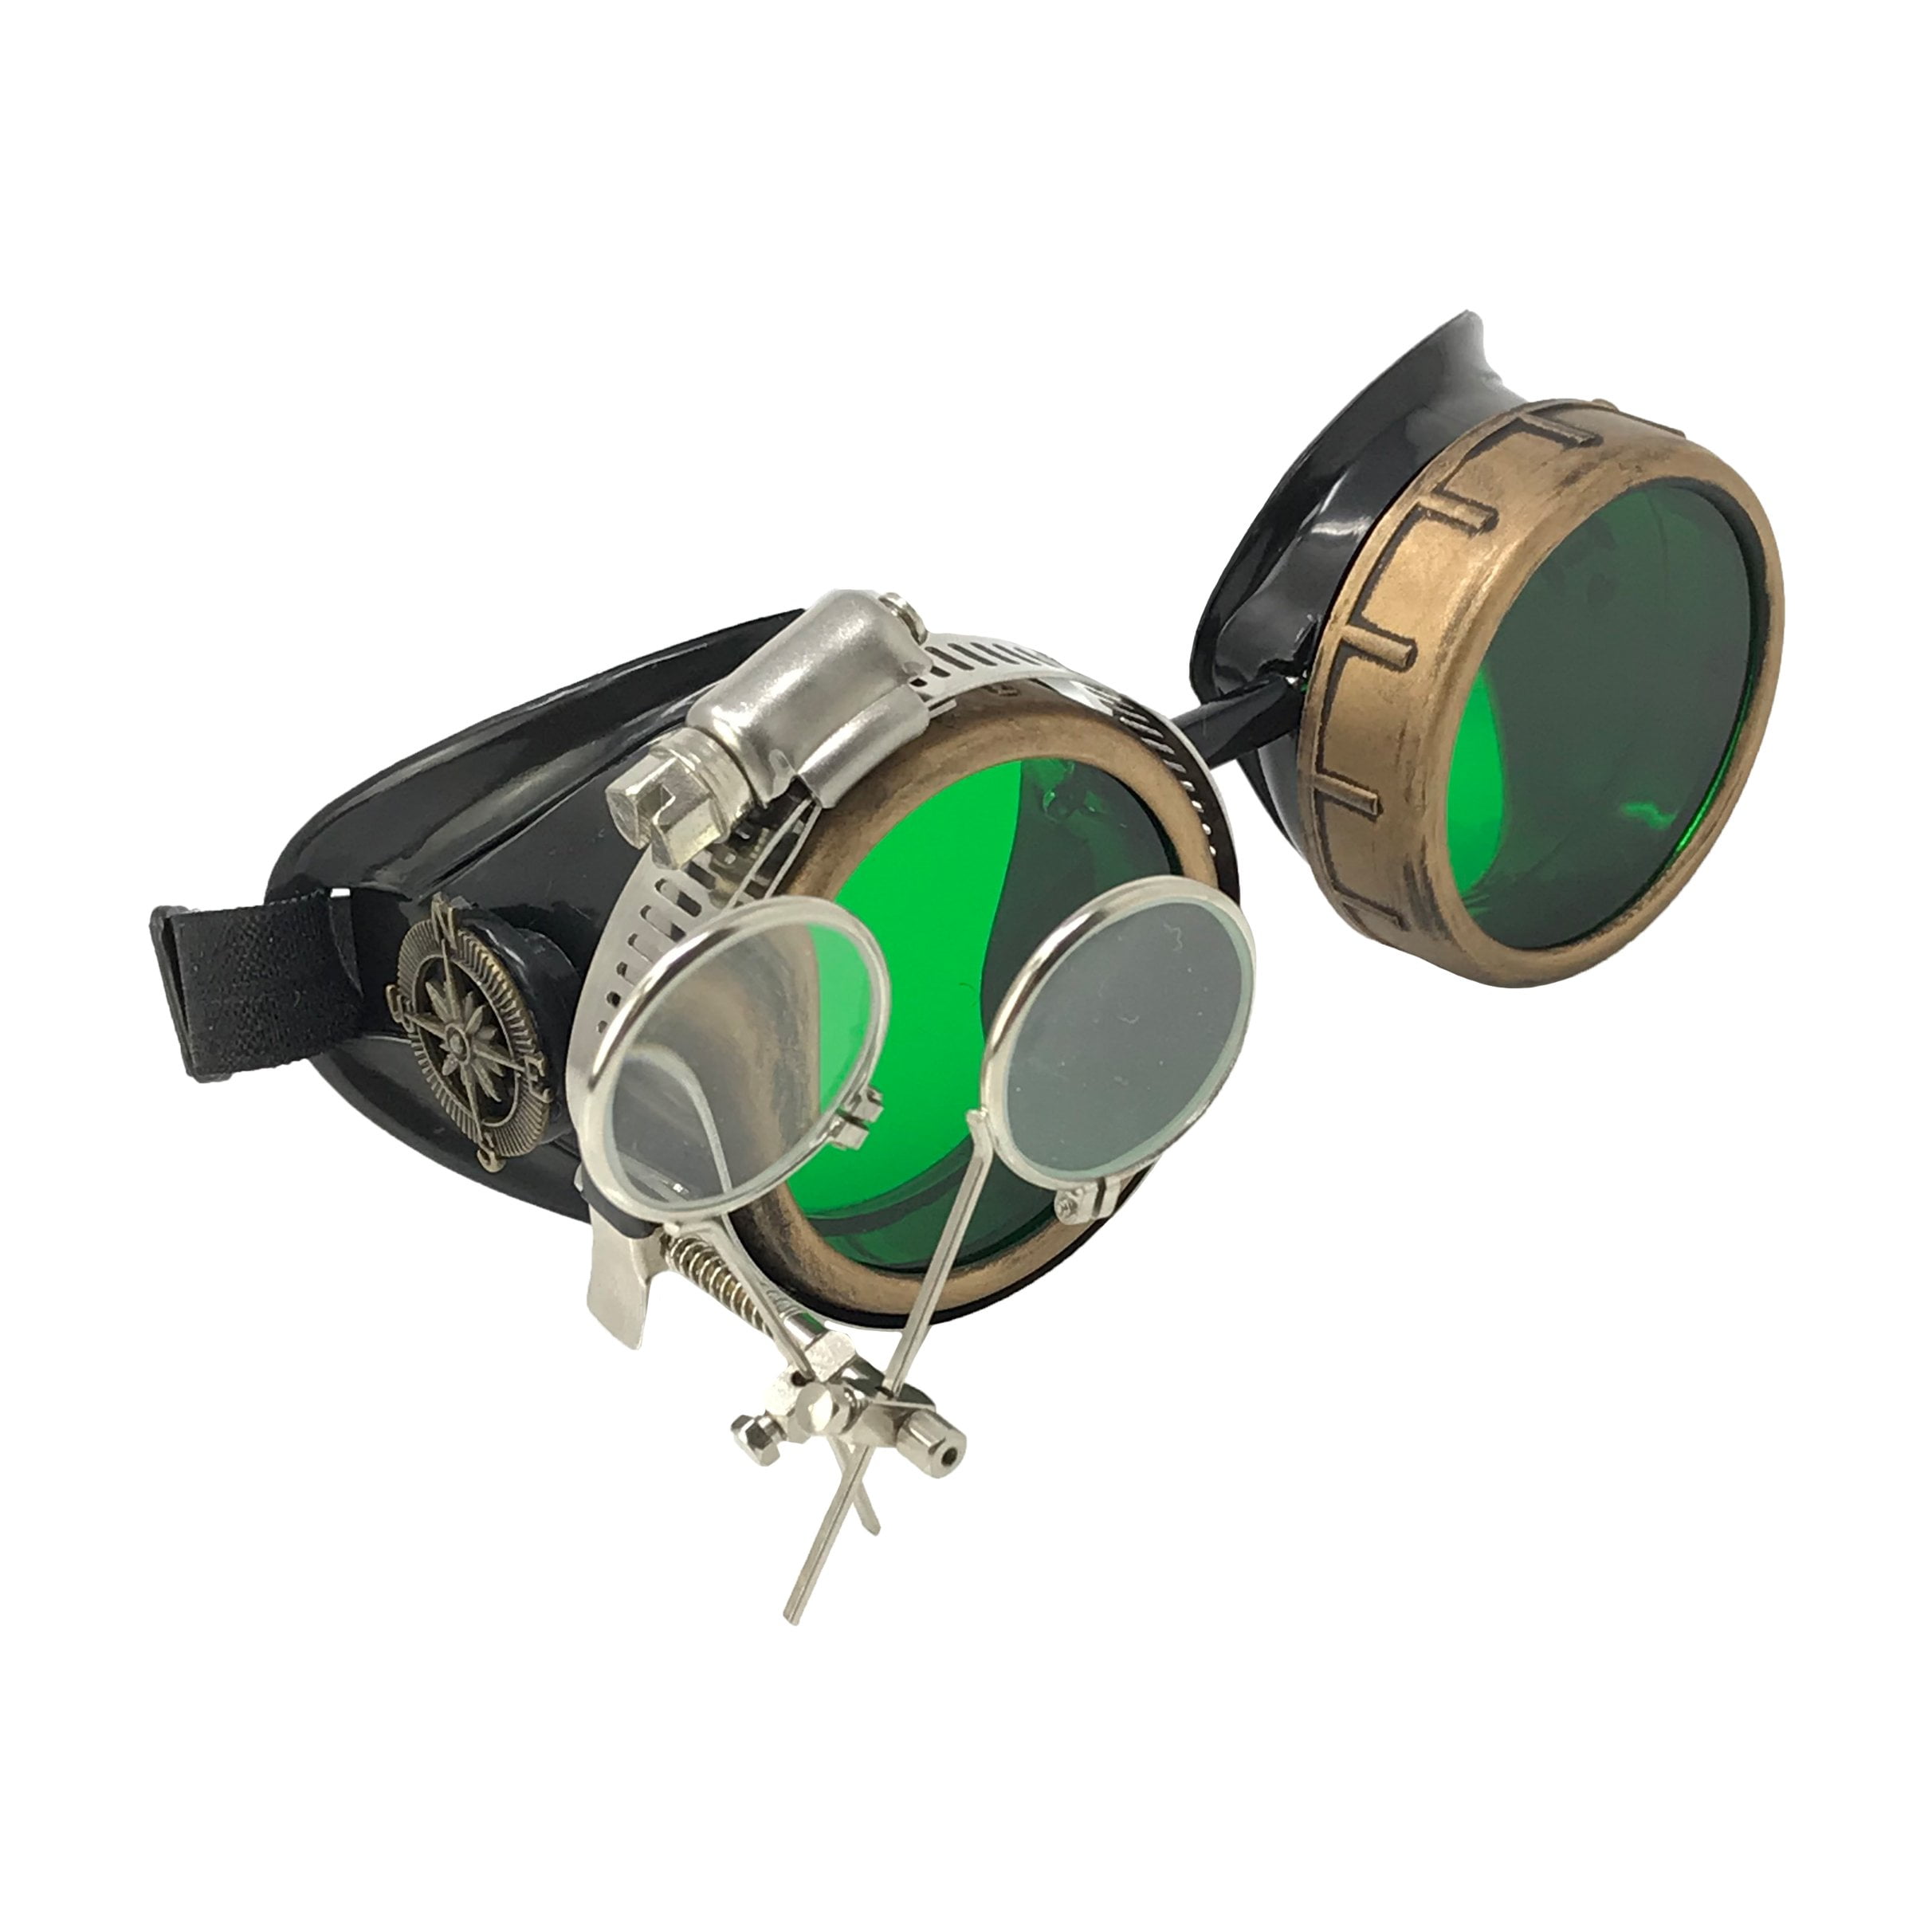 Gold Victorian Steampunk Goggles with Green Lenses